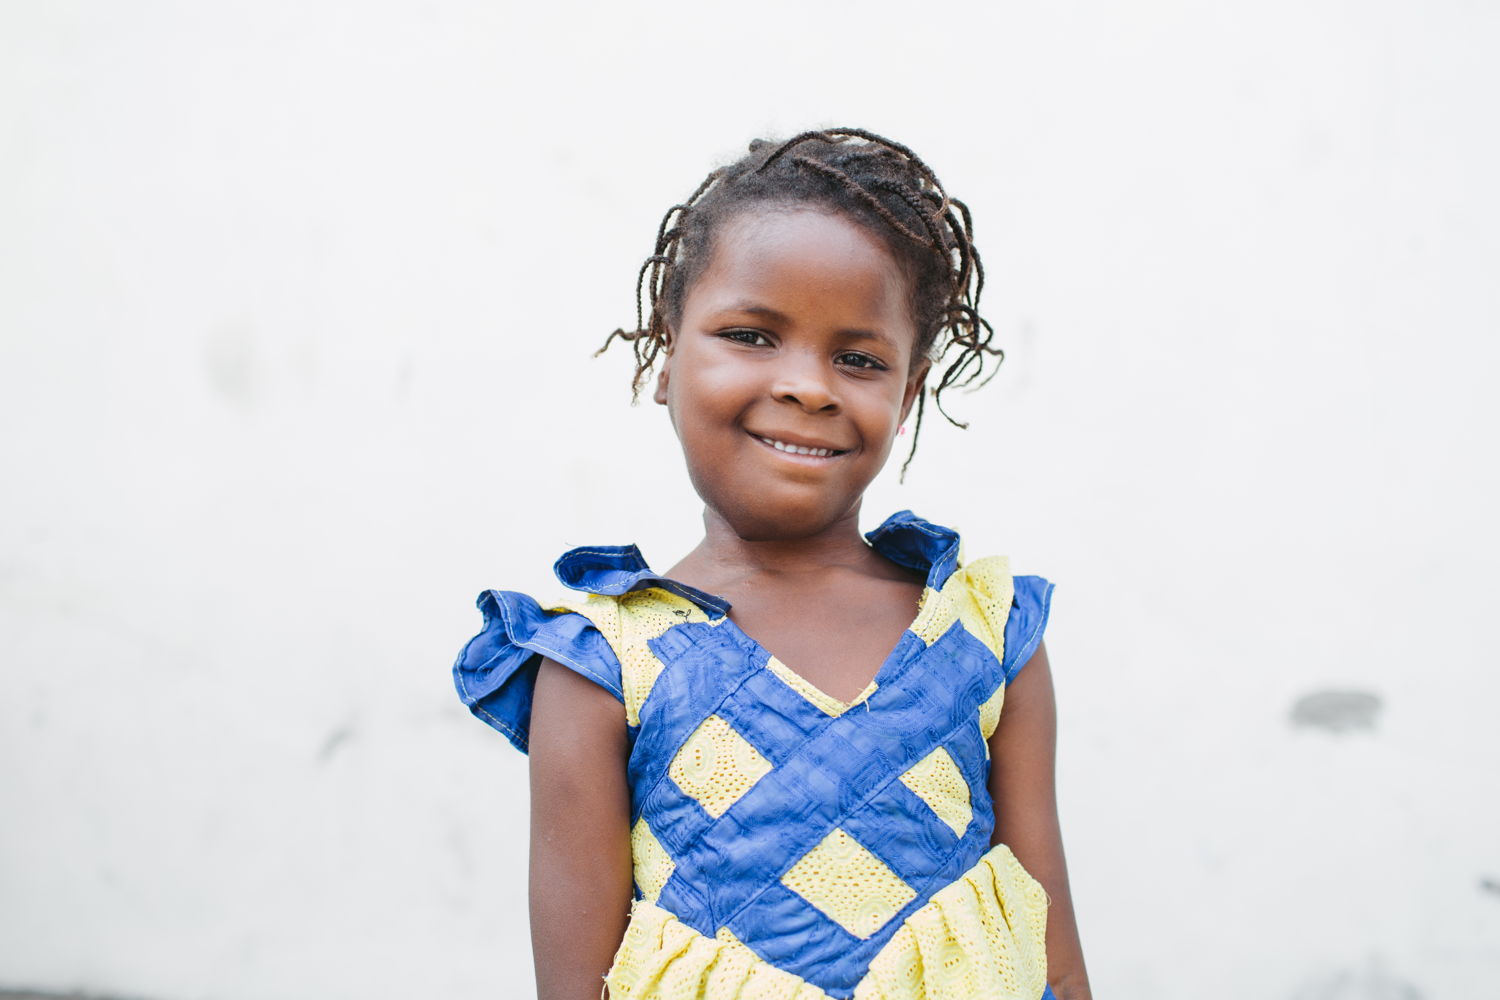 Thanks to the generous support of the inCruises community, children like Houleye have access to safe affordable surgery opening the door to a brighter future. Photo (c) Mercy Ships